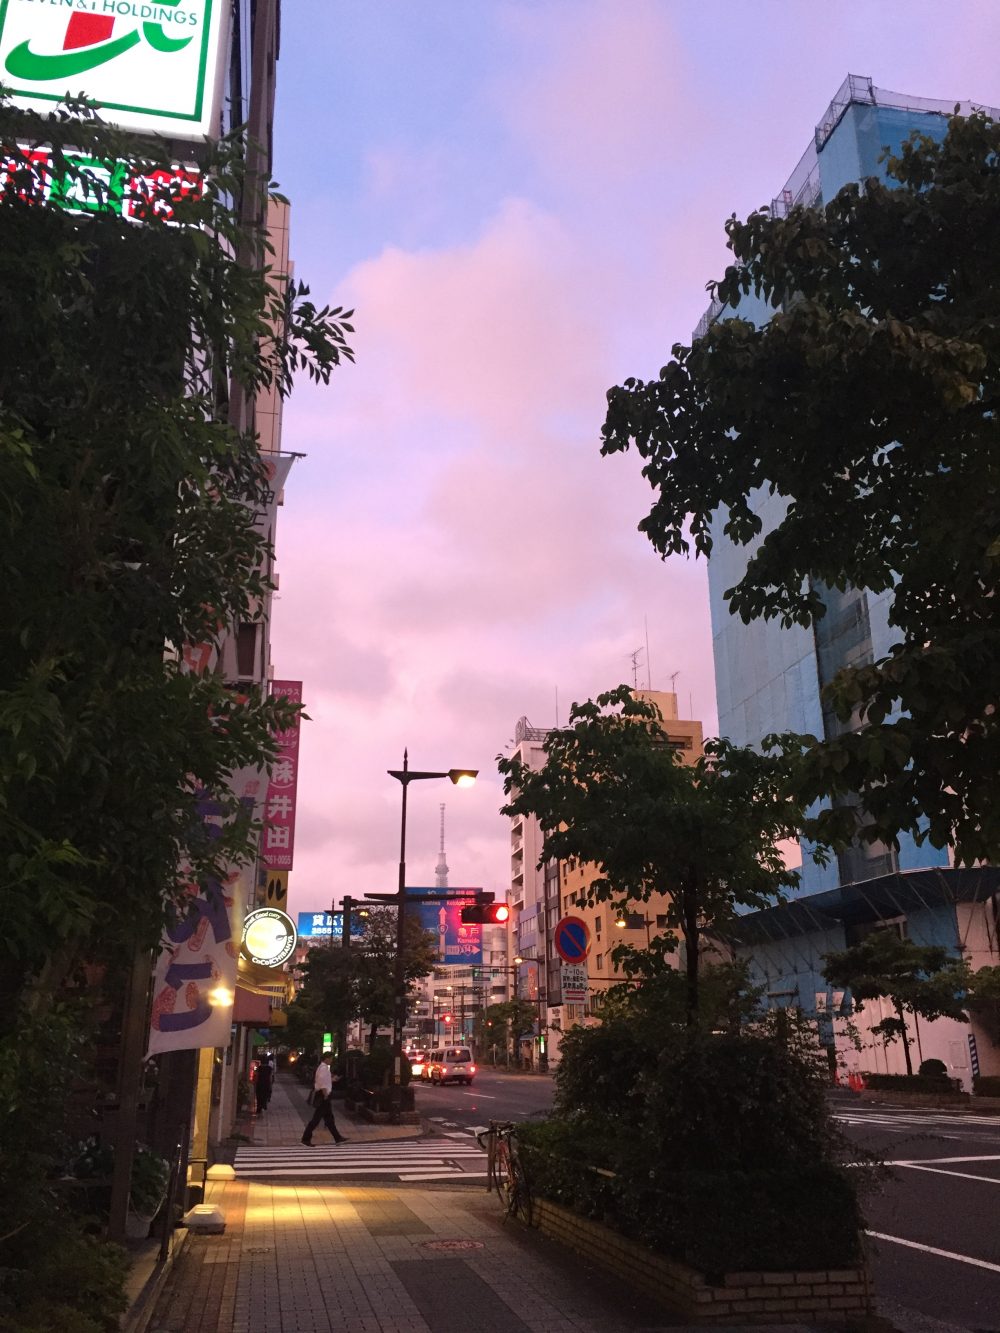 A photo of a city street at sunrise, with a light pink and blue sky.